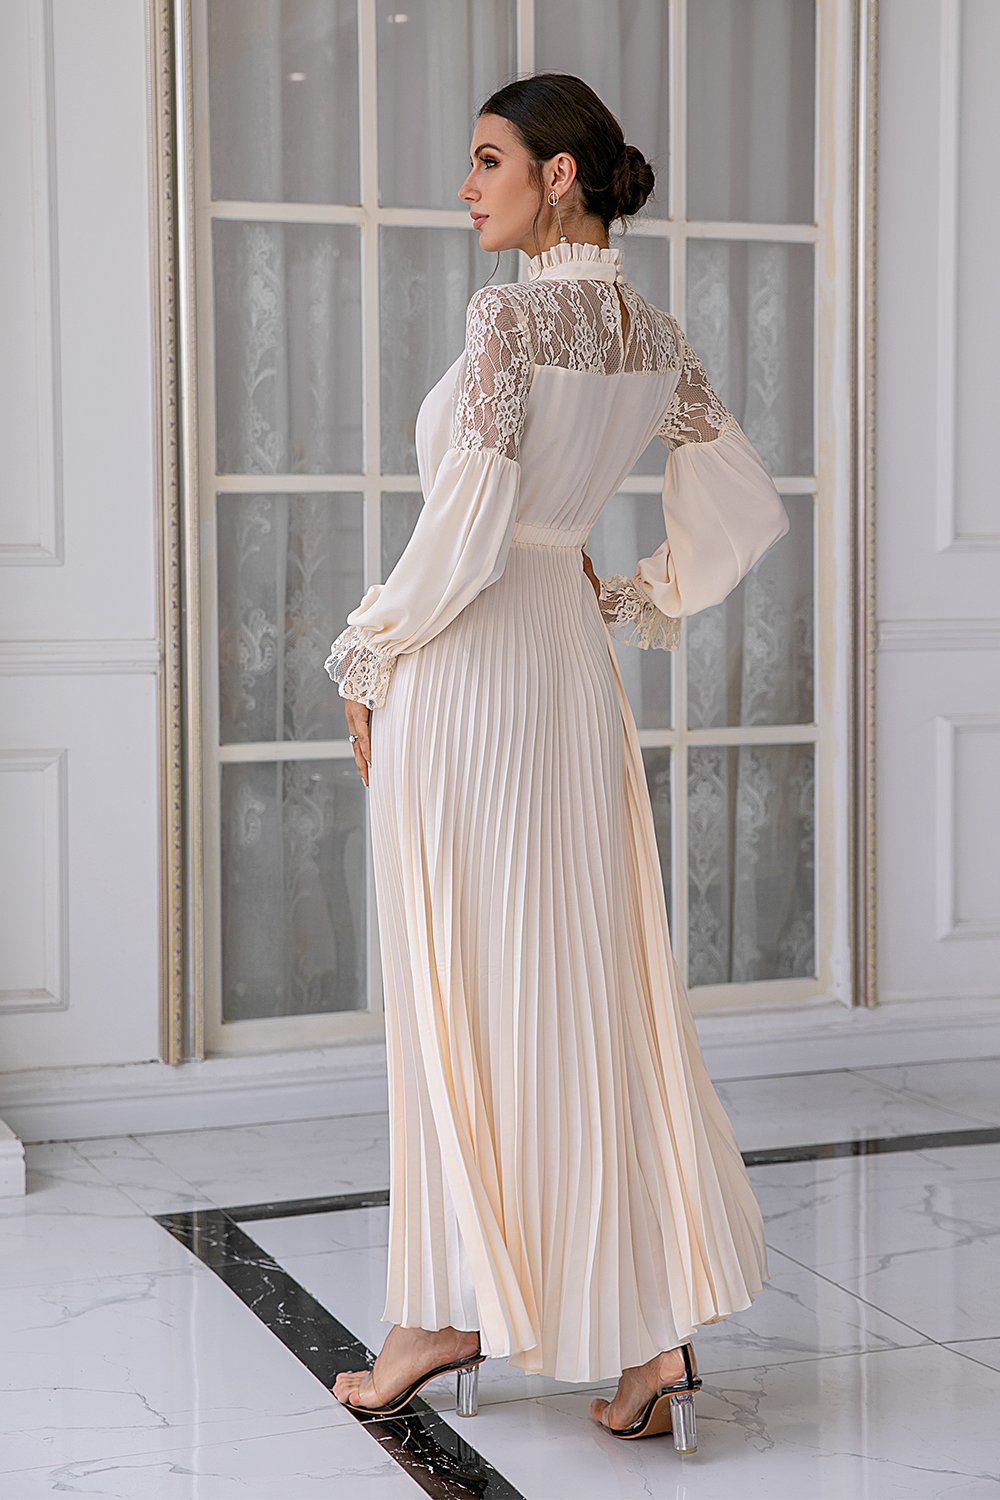 Apricot Long Sleeves Lace Mother Dress